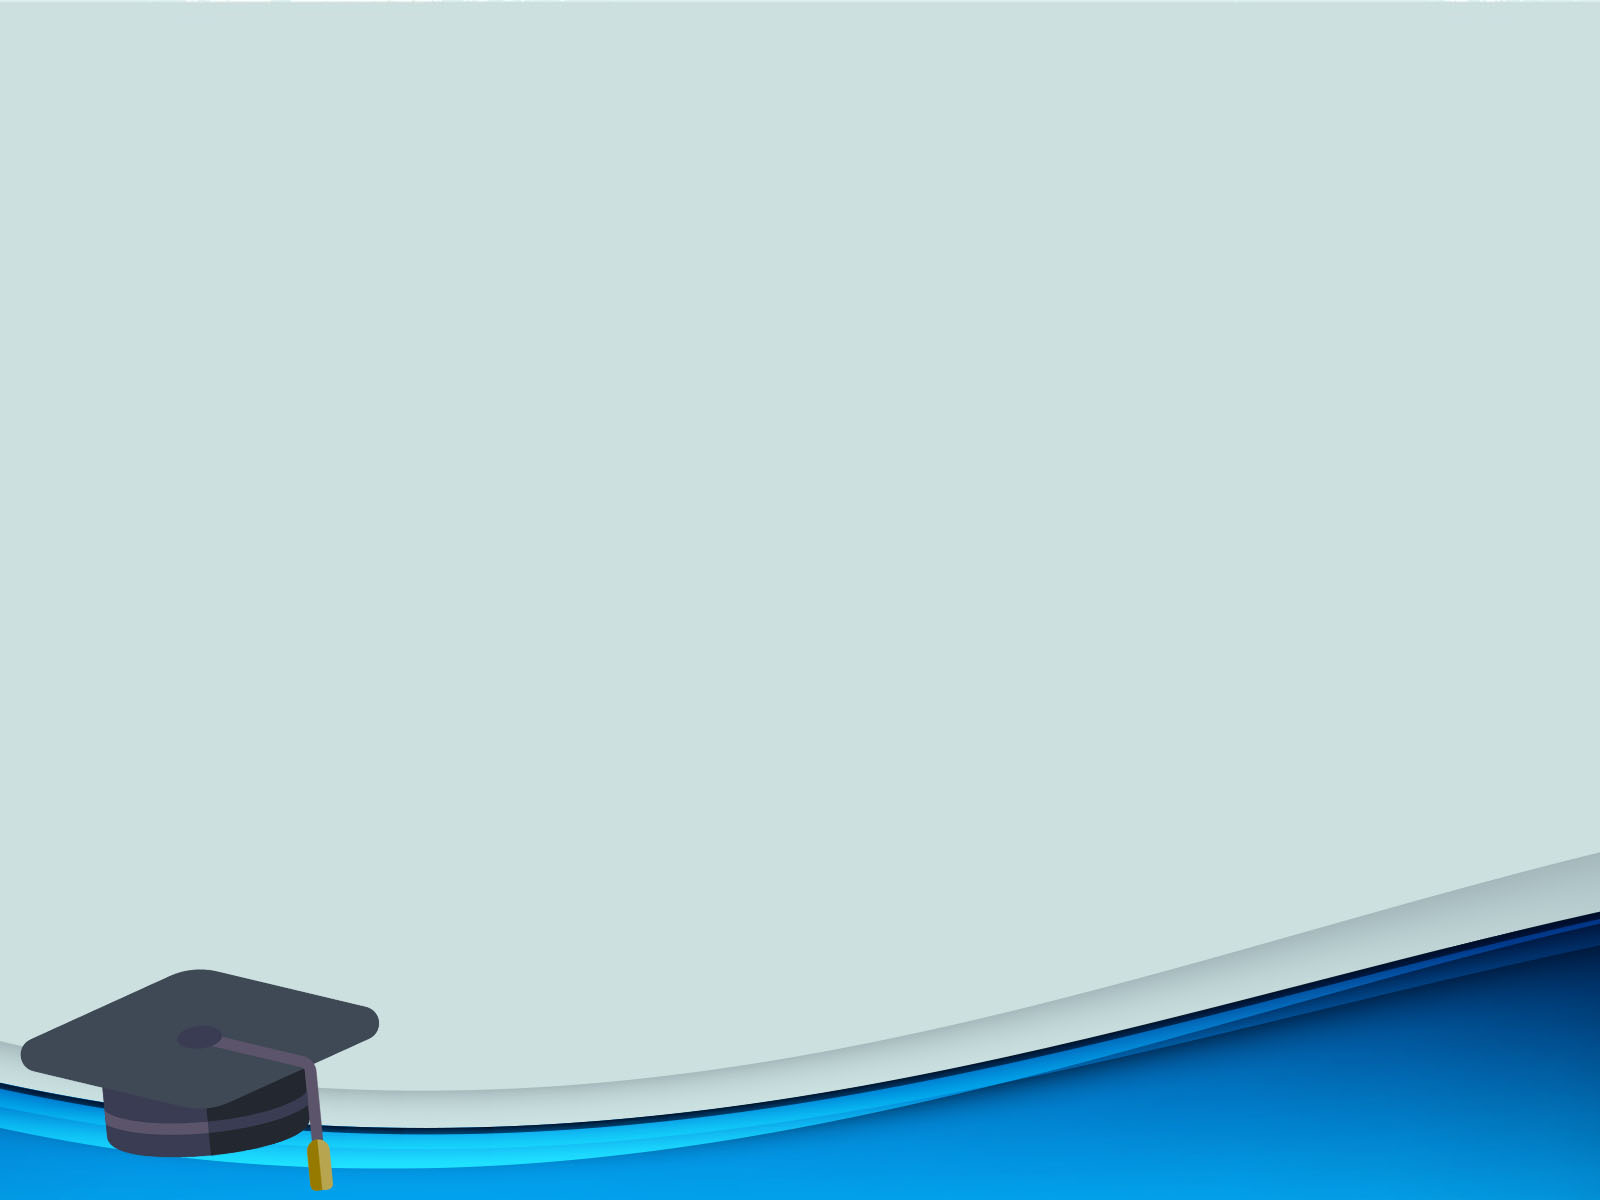 Graduation Cap Powerpoint Templates Arts Education Free PPT Backgrounds And Templates